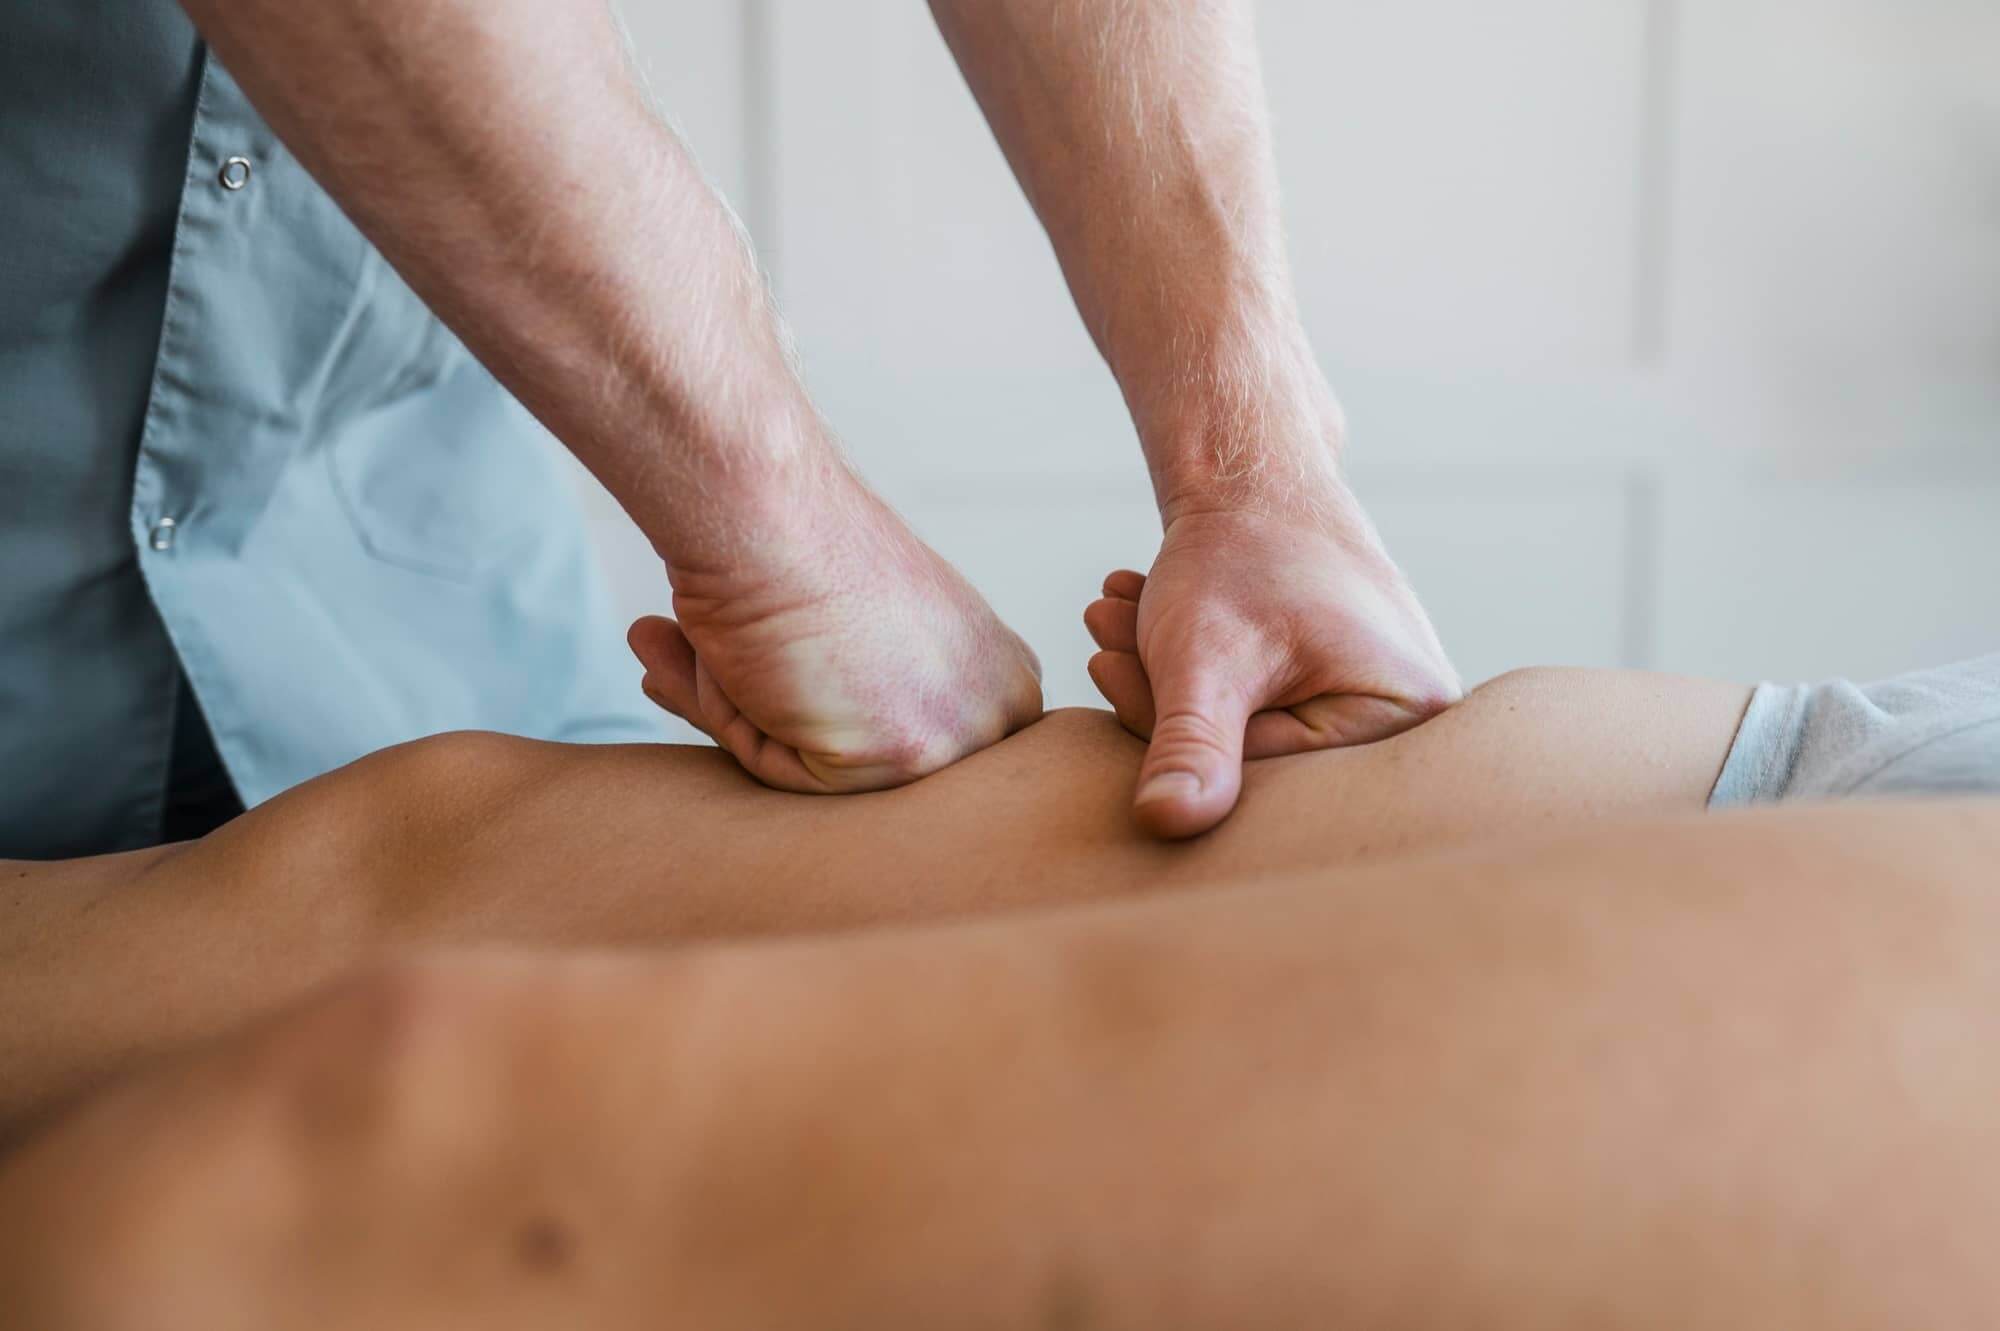 Body Therapy Spa | Physical Therapy, Body Scrubs, Skin Care